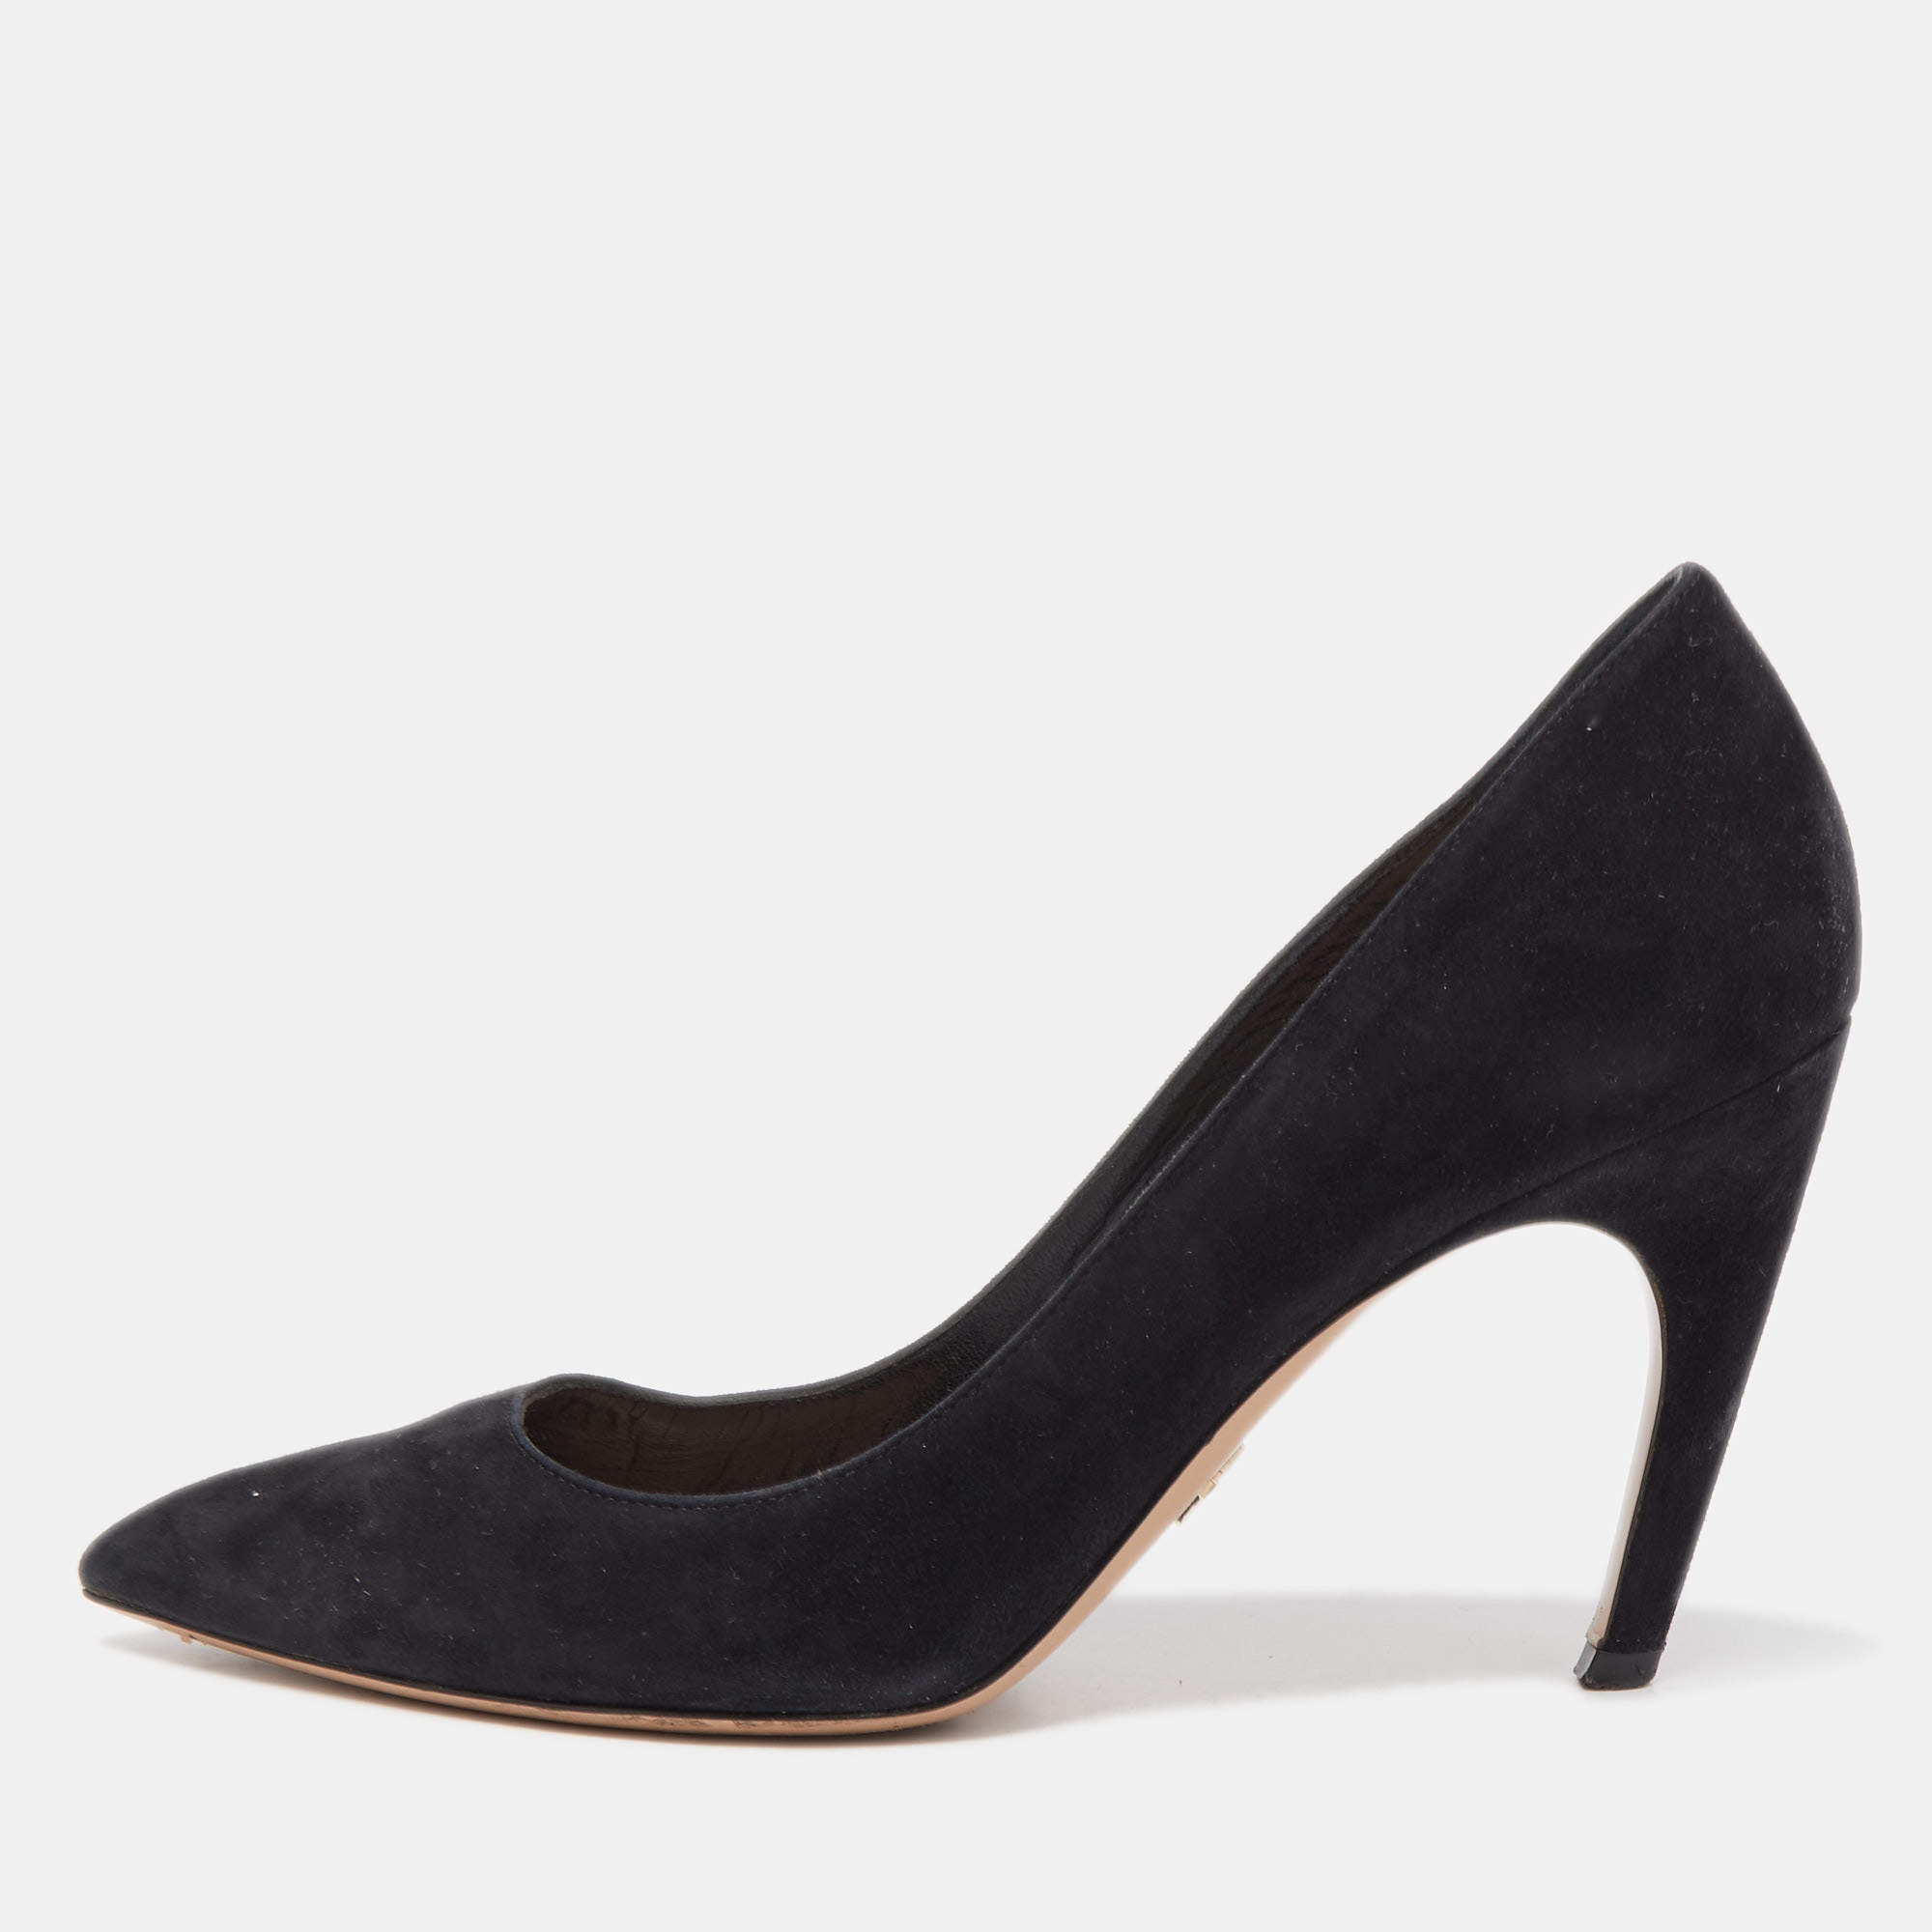 Dior Black Suede Pointed Toe Pumps Size 38